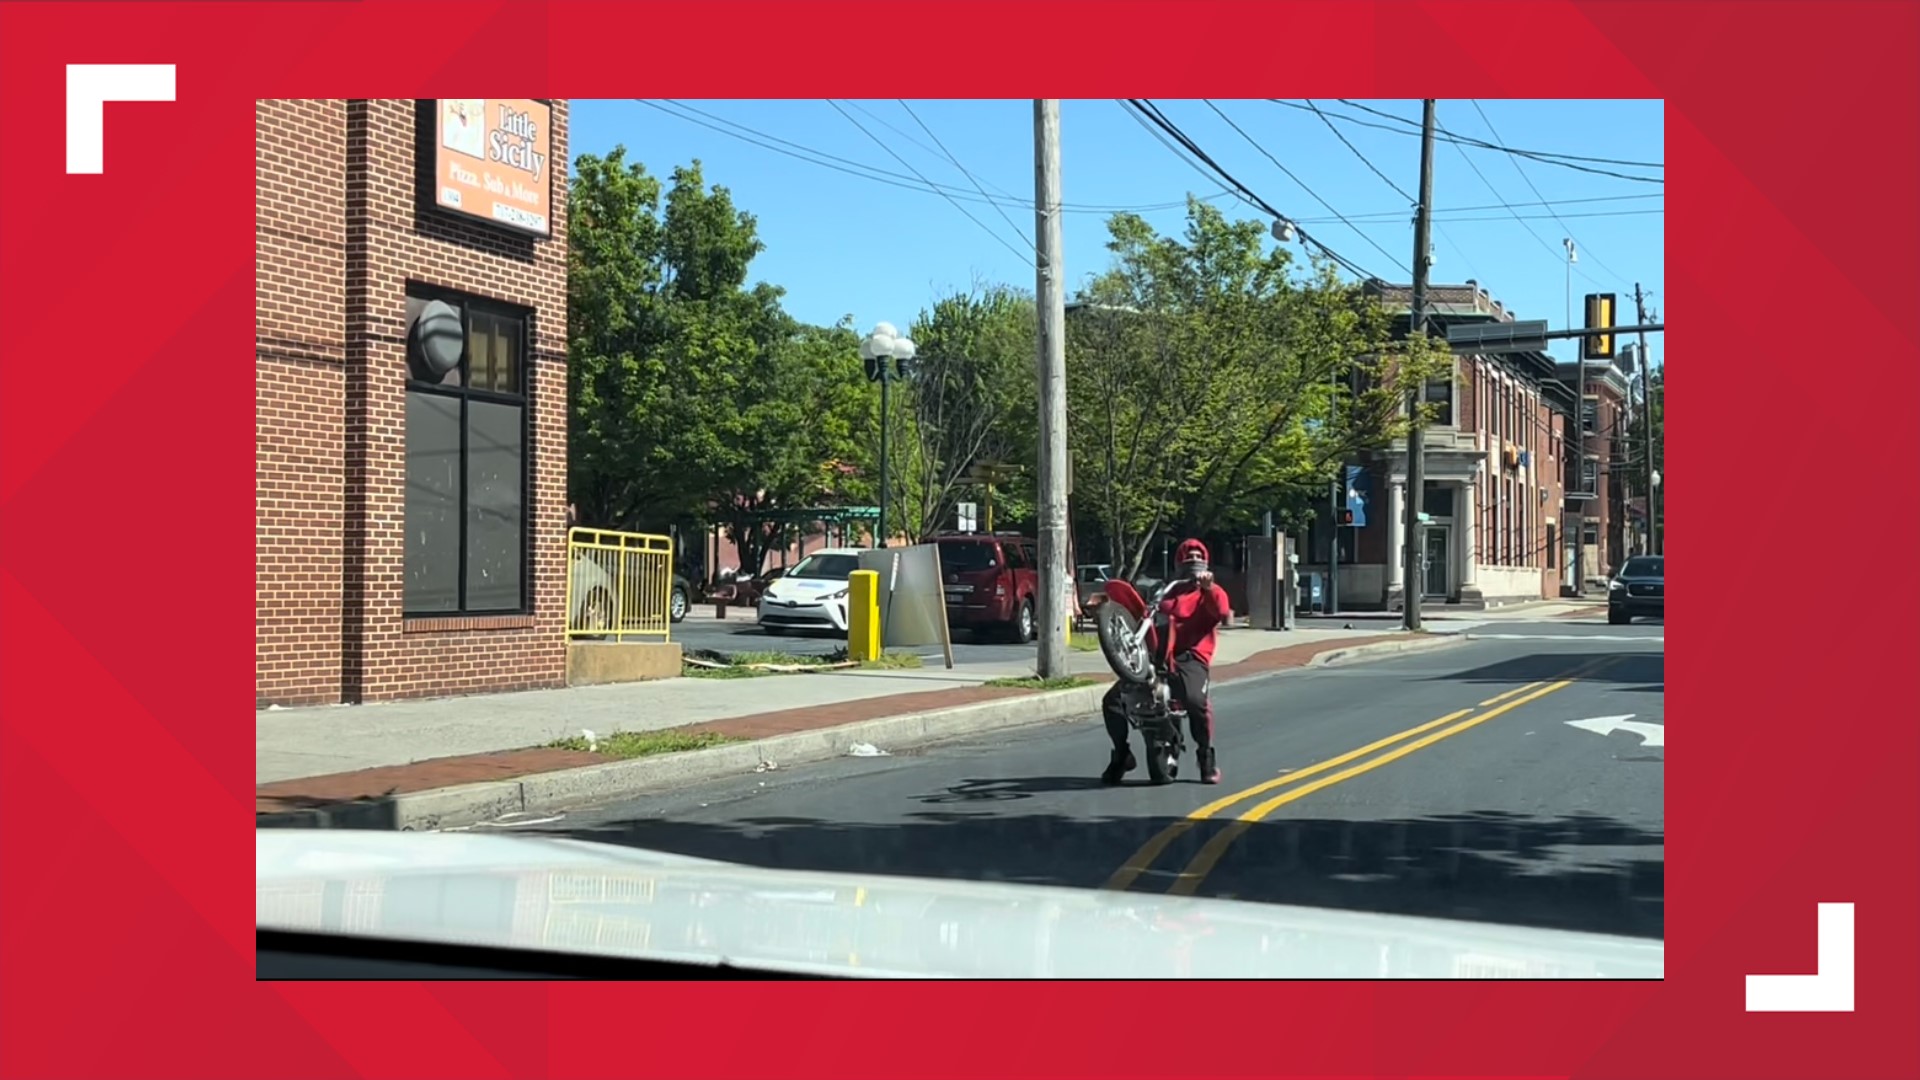 Harrisburg authorities say illegal dirt bikes are frequently seen in Allison Hill and on Front, Second and Cameron streets.